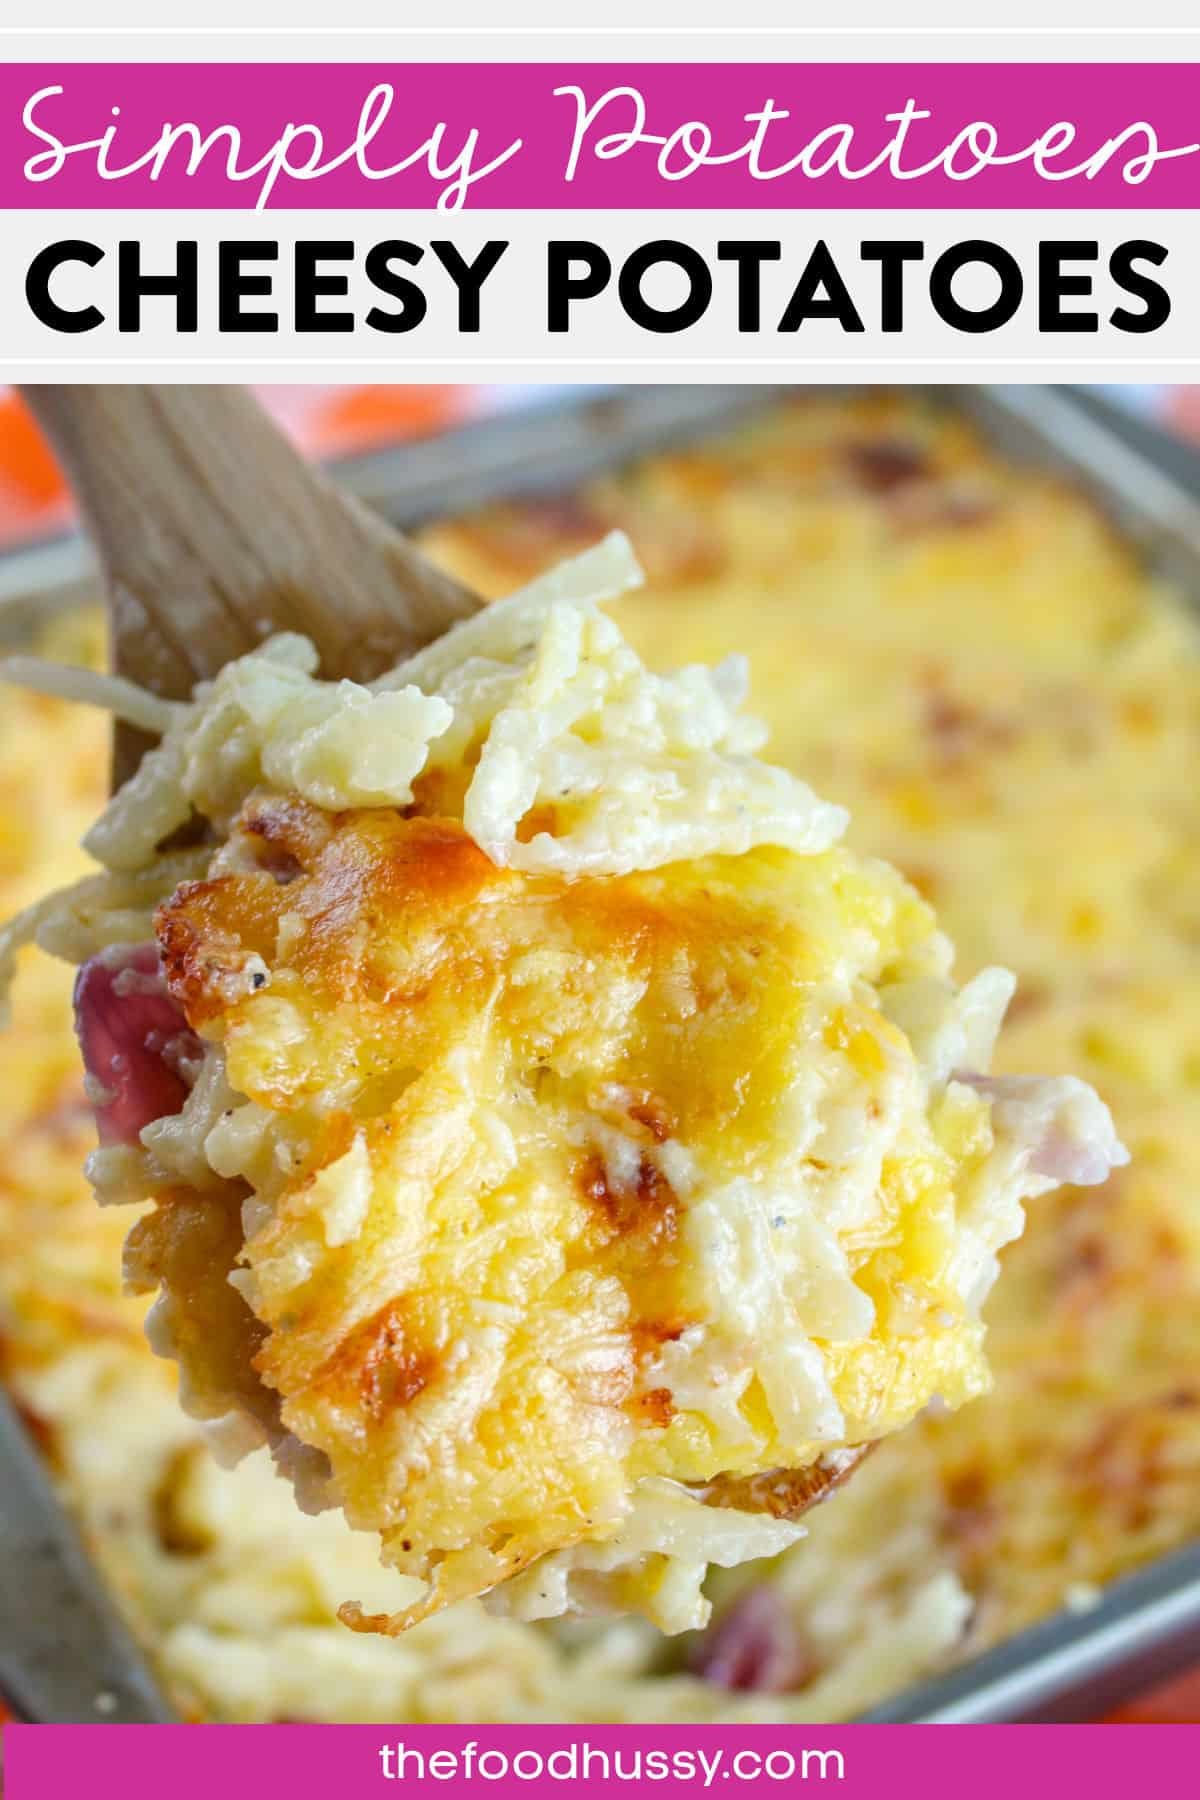 These Simply Potatoes Cheesy Potatoes are a fun take on classic cheesy potatoes but with a Swiss cheese twist! Jarlsberg cheese and red onions add an extra bite to this traditional dish! via @foodhussy